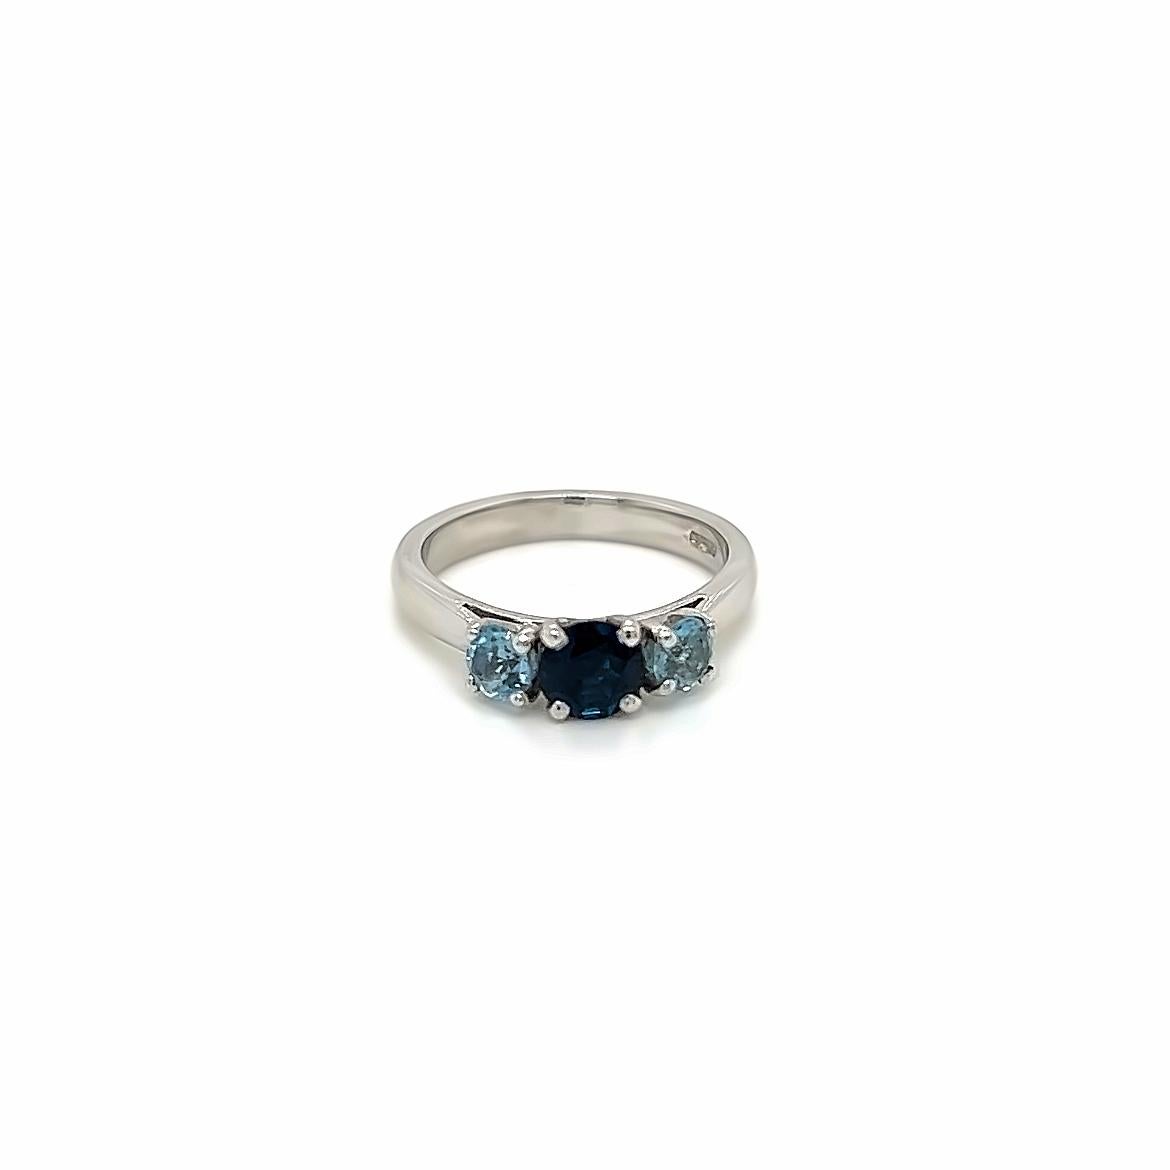 This gorgeous three-stone ring features a Round Brilliant Blue Sapphire at its centre, with smaller round brilliant aquamarines on either side of it. The precious stones are held in a claw setting on a Platinum band.

The luscious blue sapphire